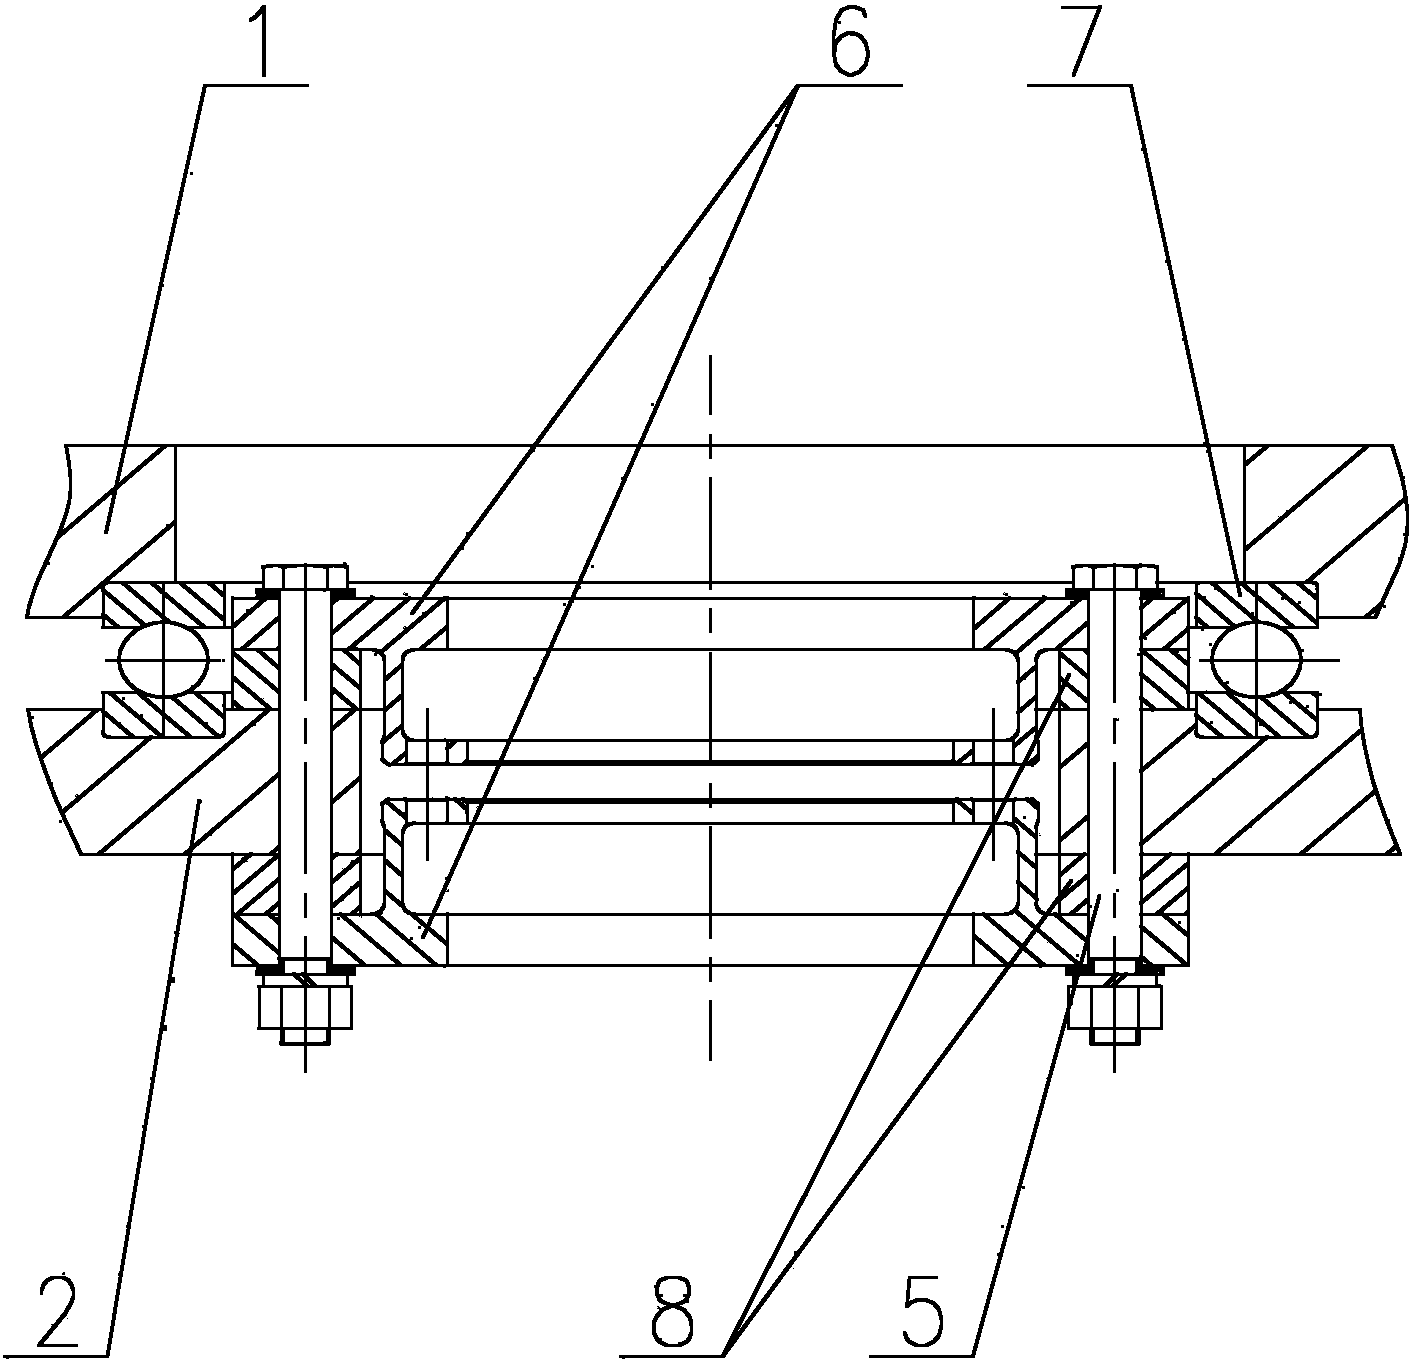 Shaft testing device capable of exerting two-stage combined tension-torsion loading simultaneously